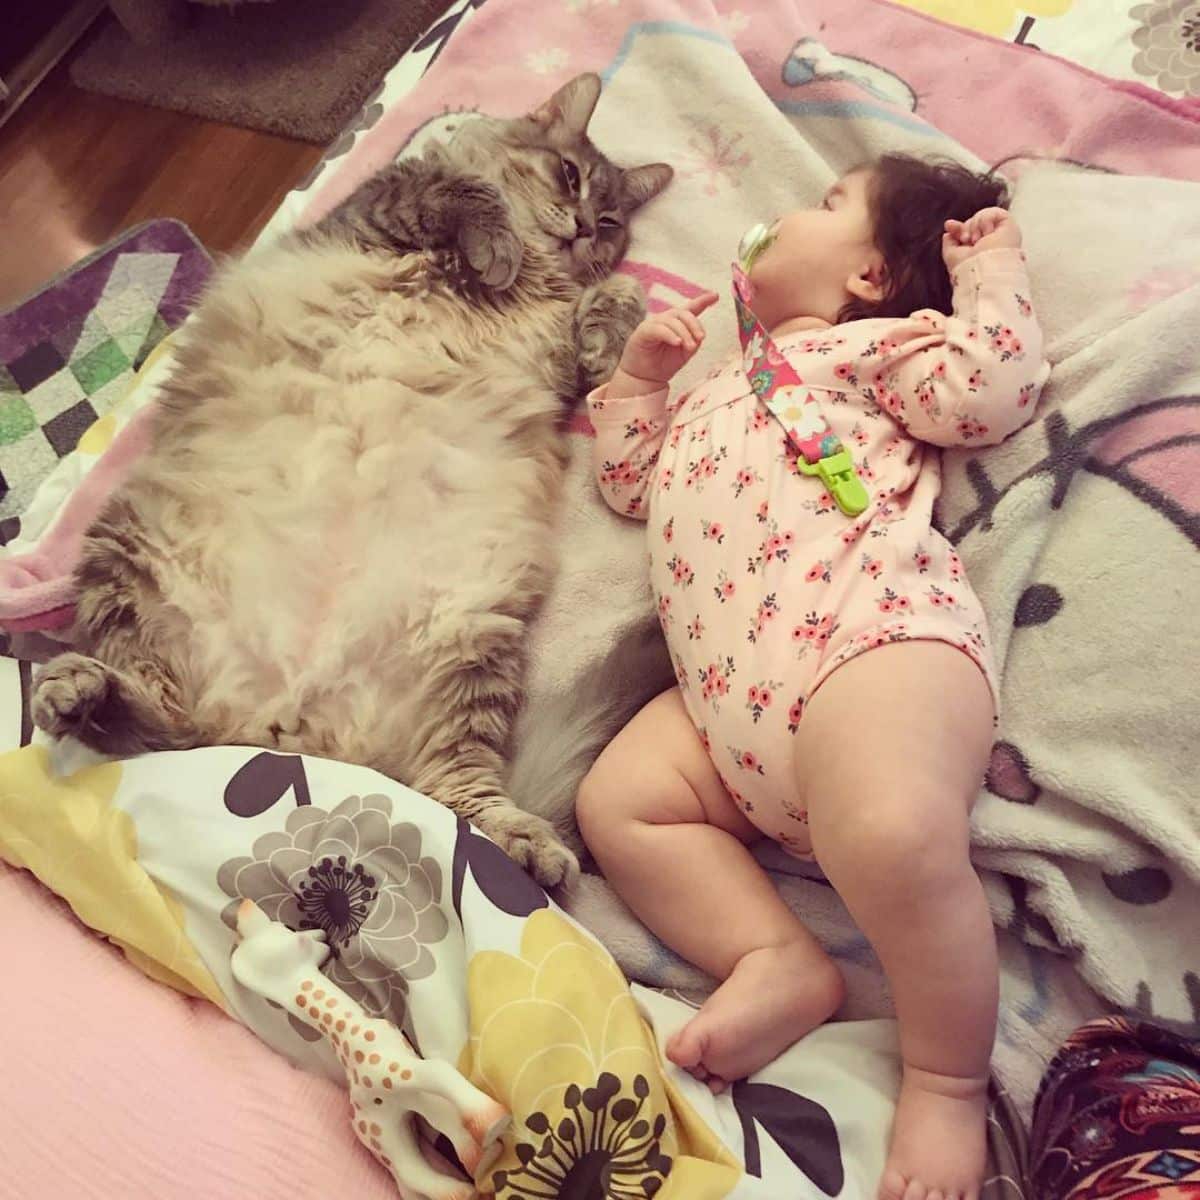 An adorable baby lying next to a fluffy maine coon on a bed.